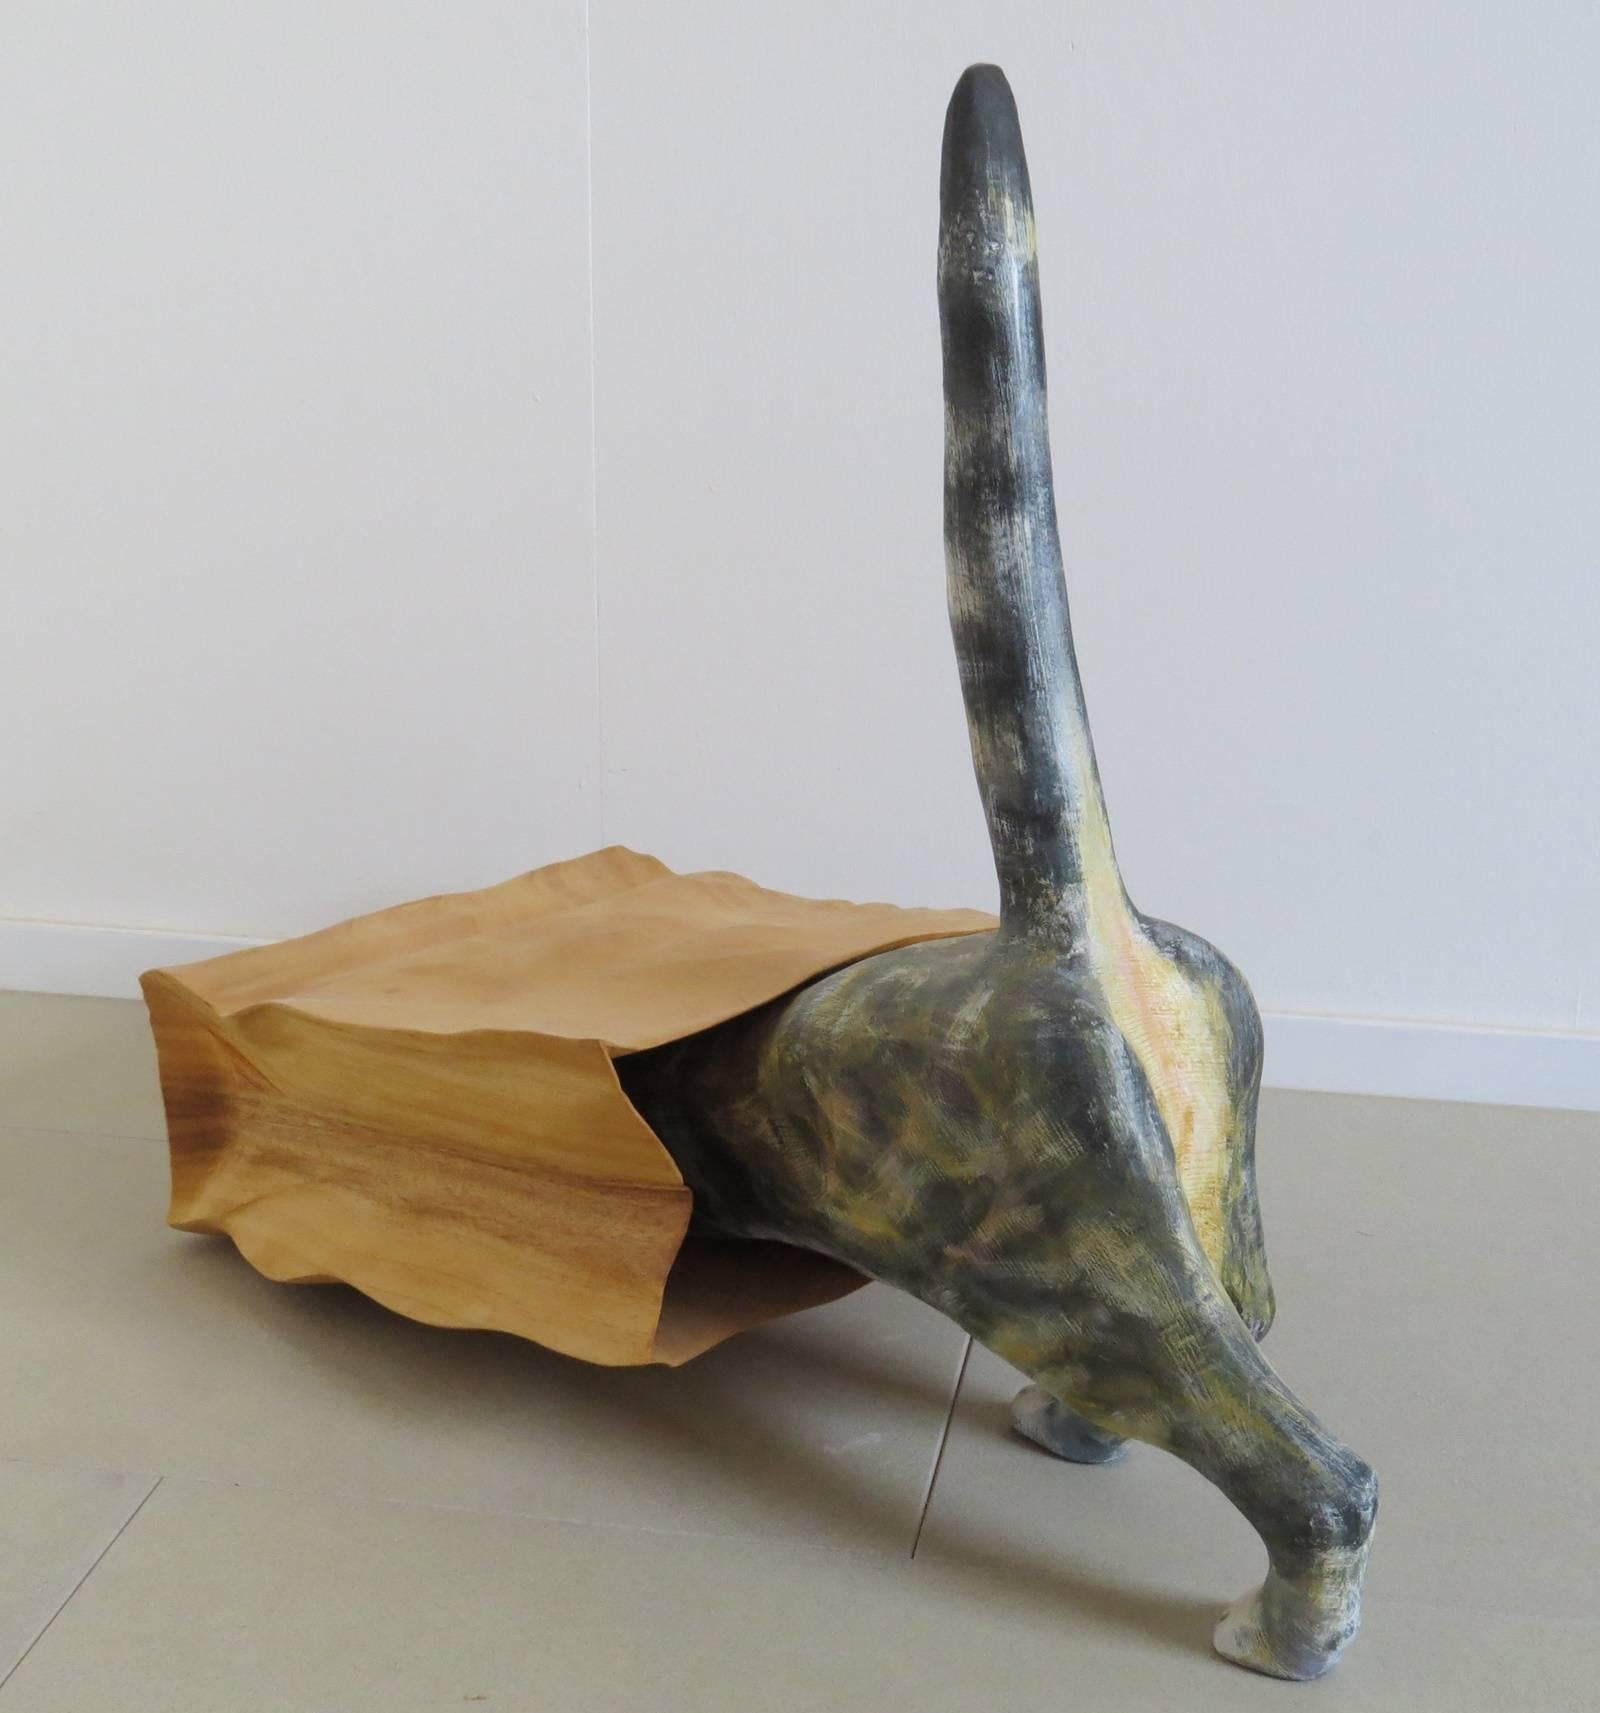 Not only for cat lovers.
Wooden sculpture hand-carved in original size.

Every cat owner knows this situation: The curious cat rummages through a grocery bag - here made as a sculpture.
The bag made of wood with folds and creases.
The cat